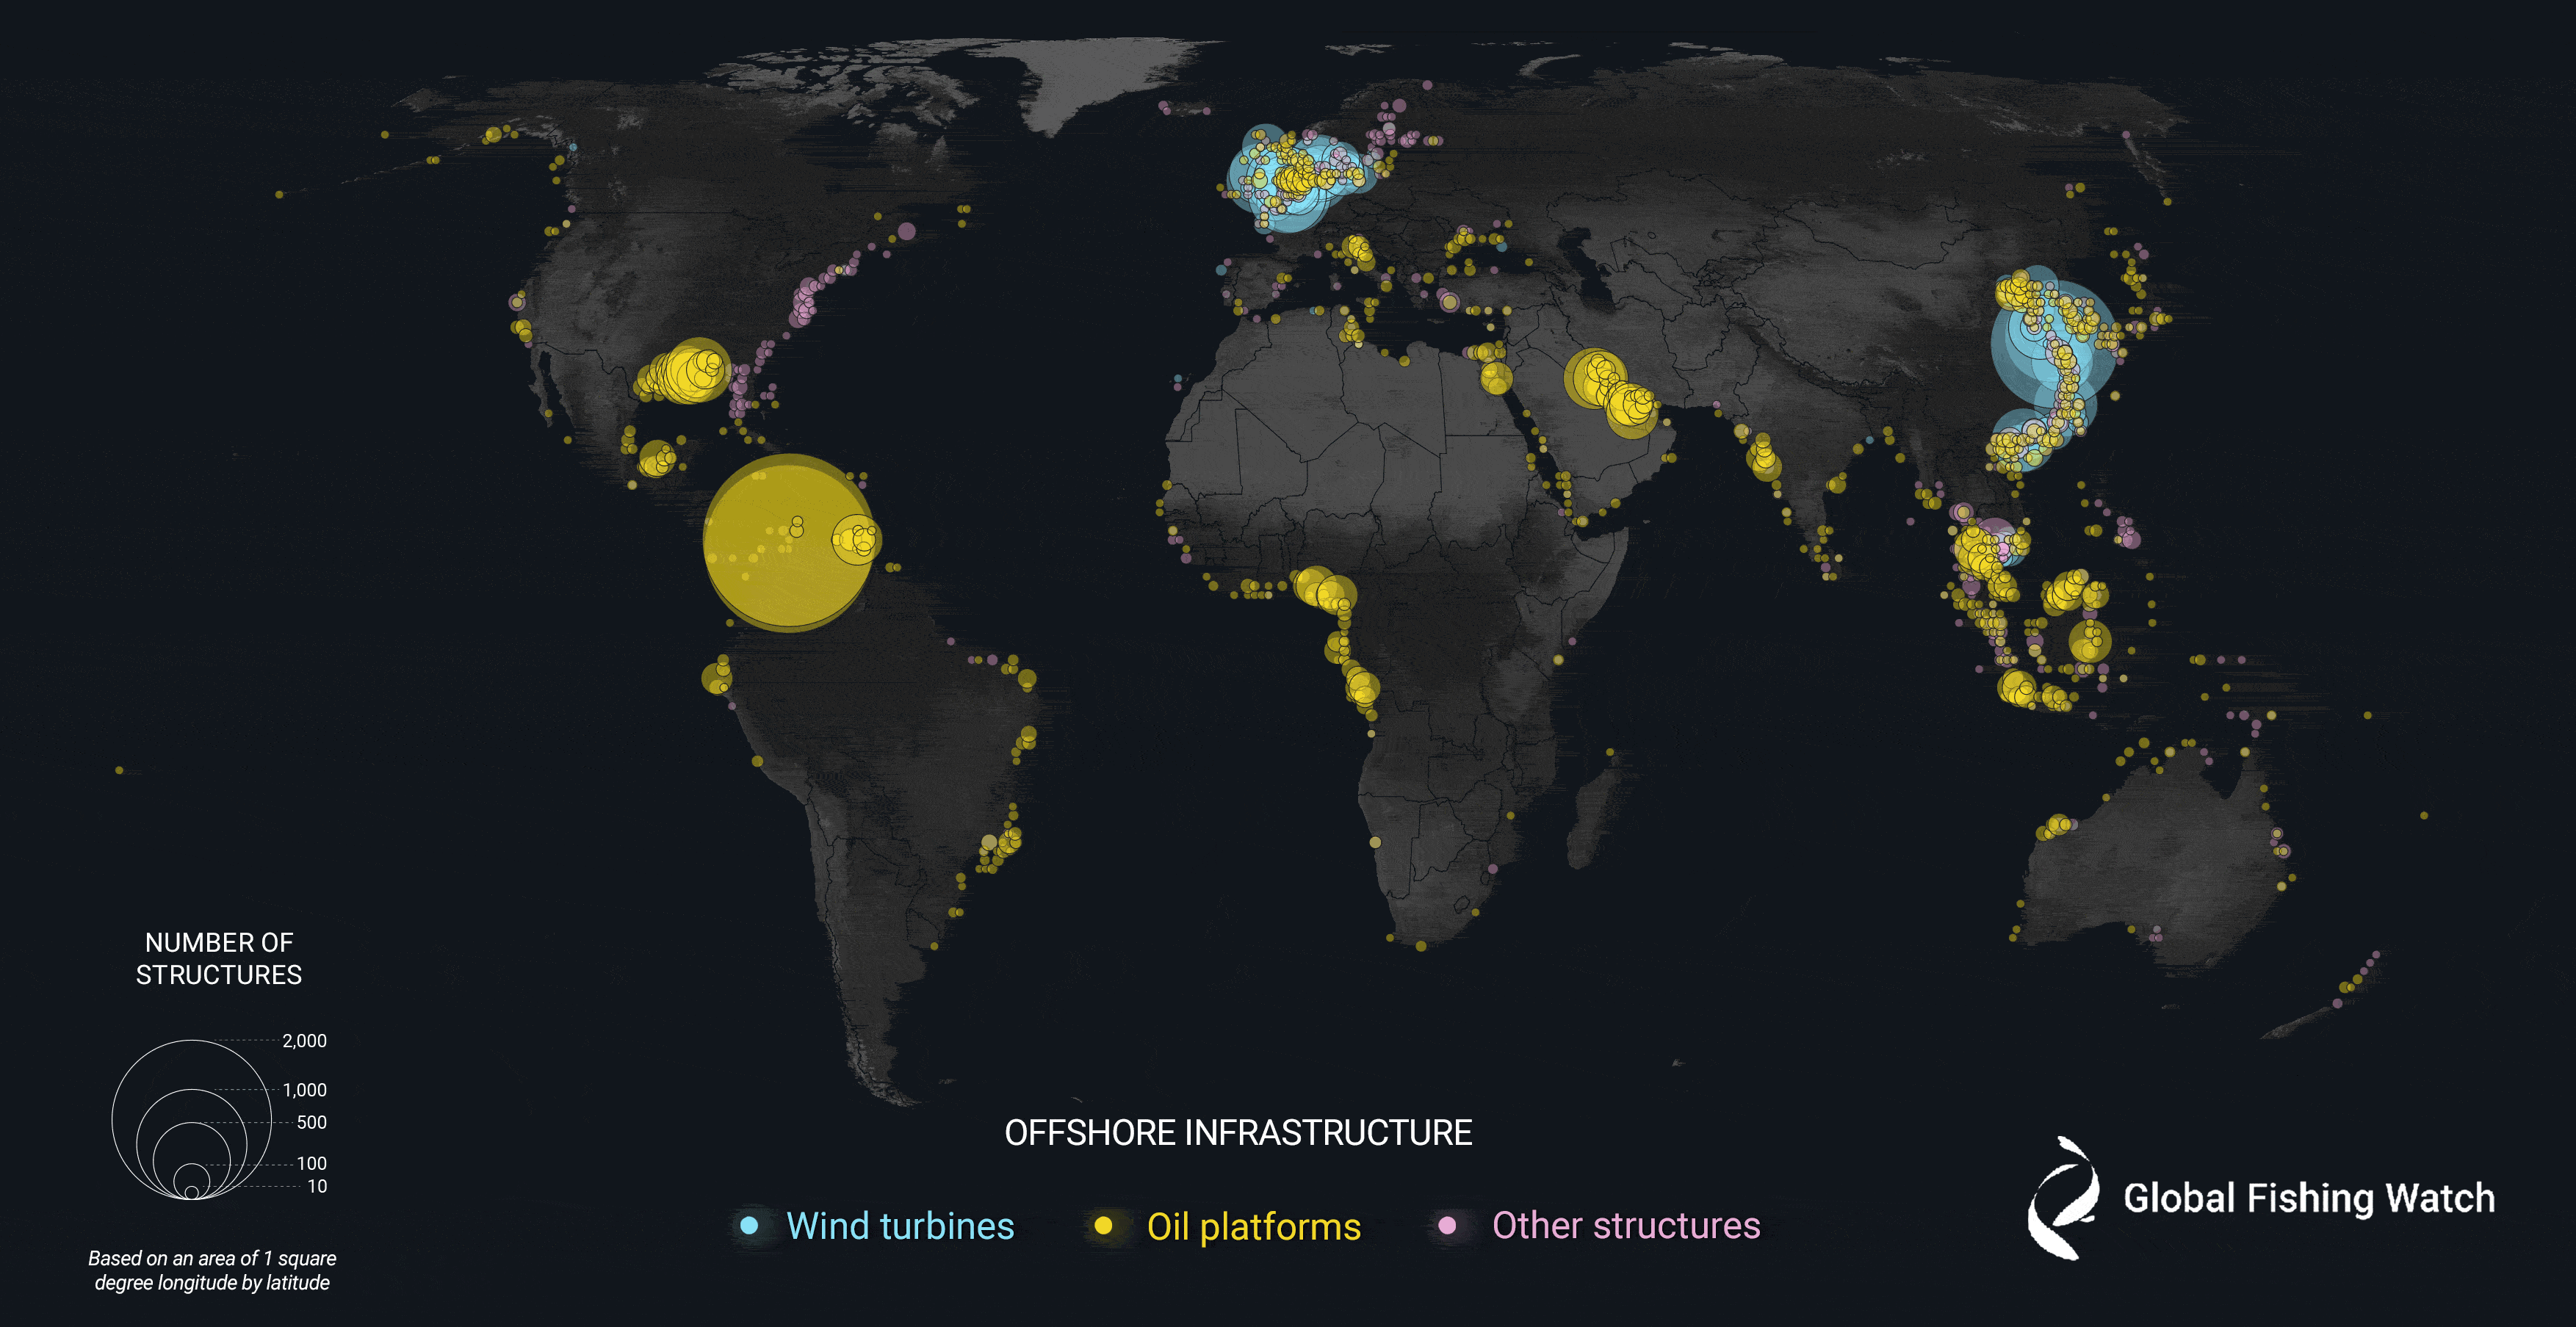 oil platforms light up in yellow, concentrated in the Caribbean, and wind turbines light up in blue, concentrated in East Asia and Northern Europe